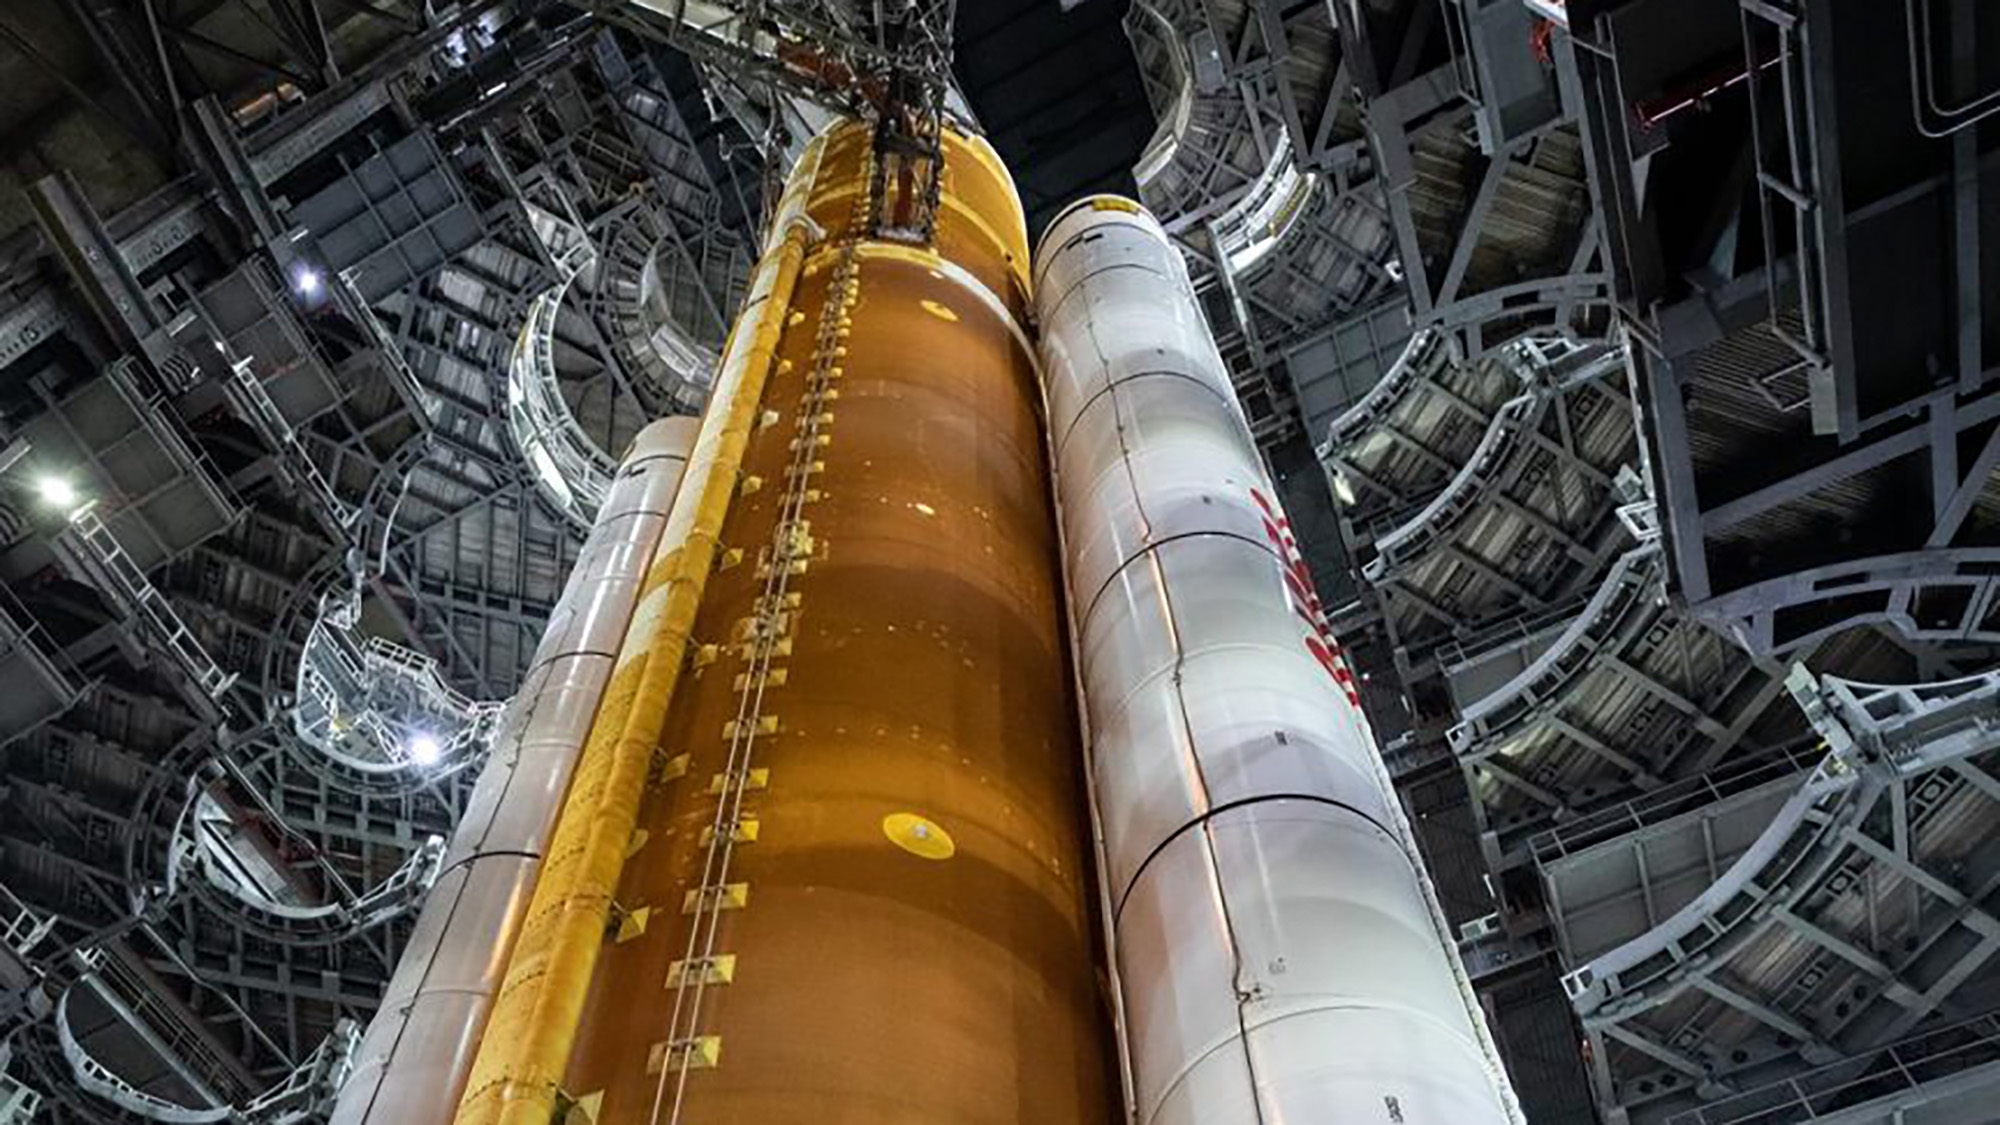 Lunar Launch Preps Underway At First Rollout Of NASA’s Artemis I Moon Rocket